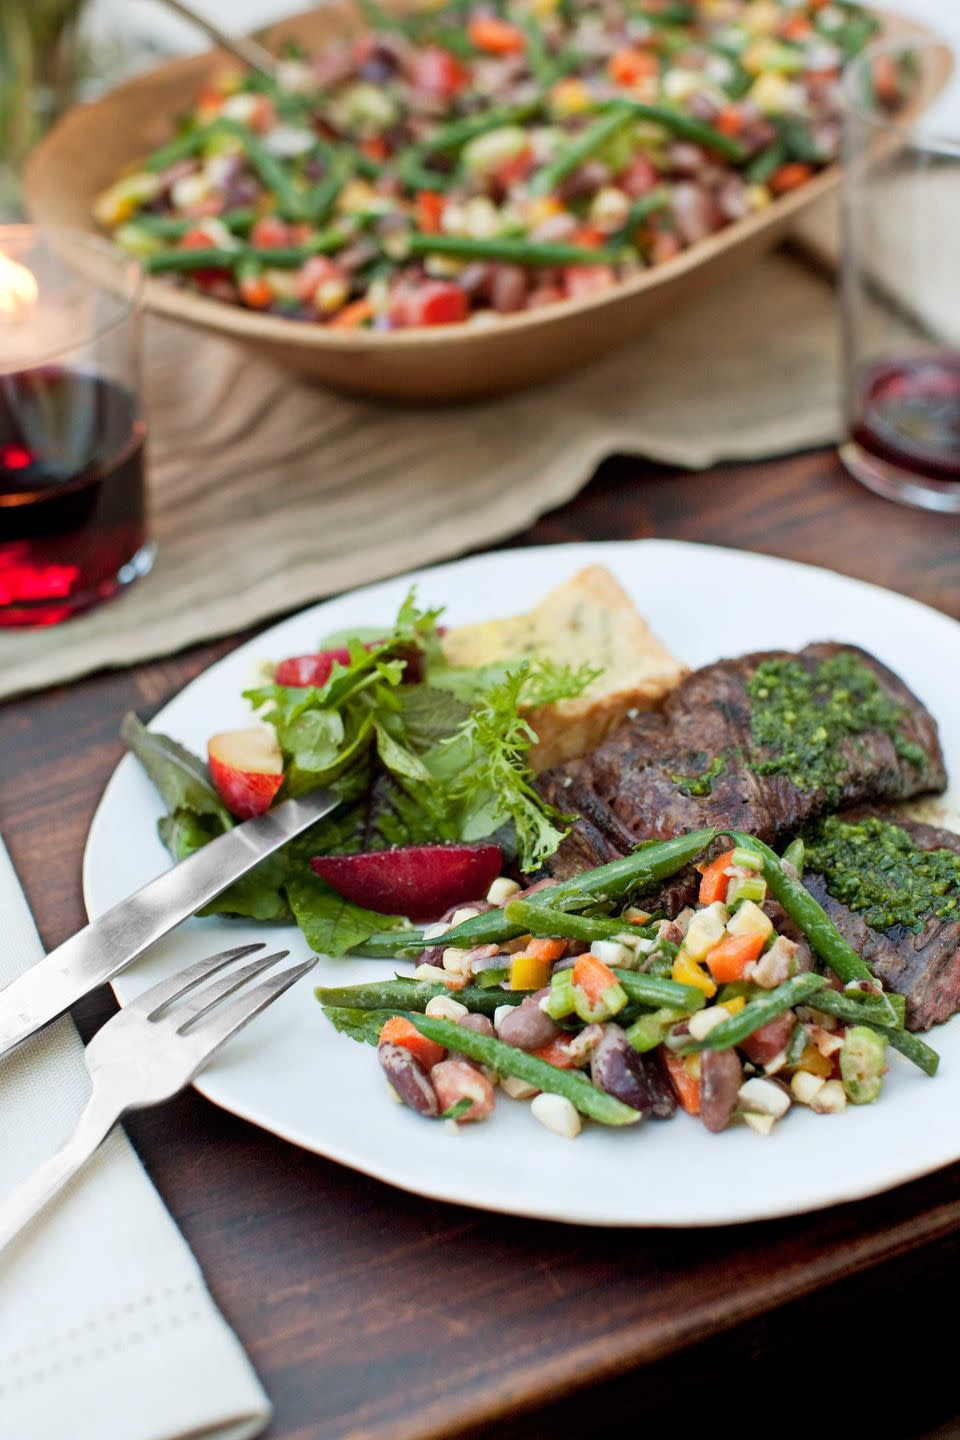 grilled skirt steak with red wine chimichurri served with salad and vegetables on a white plate